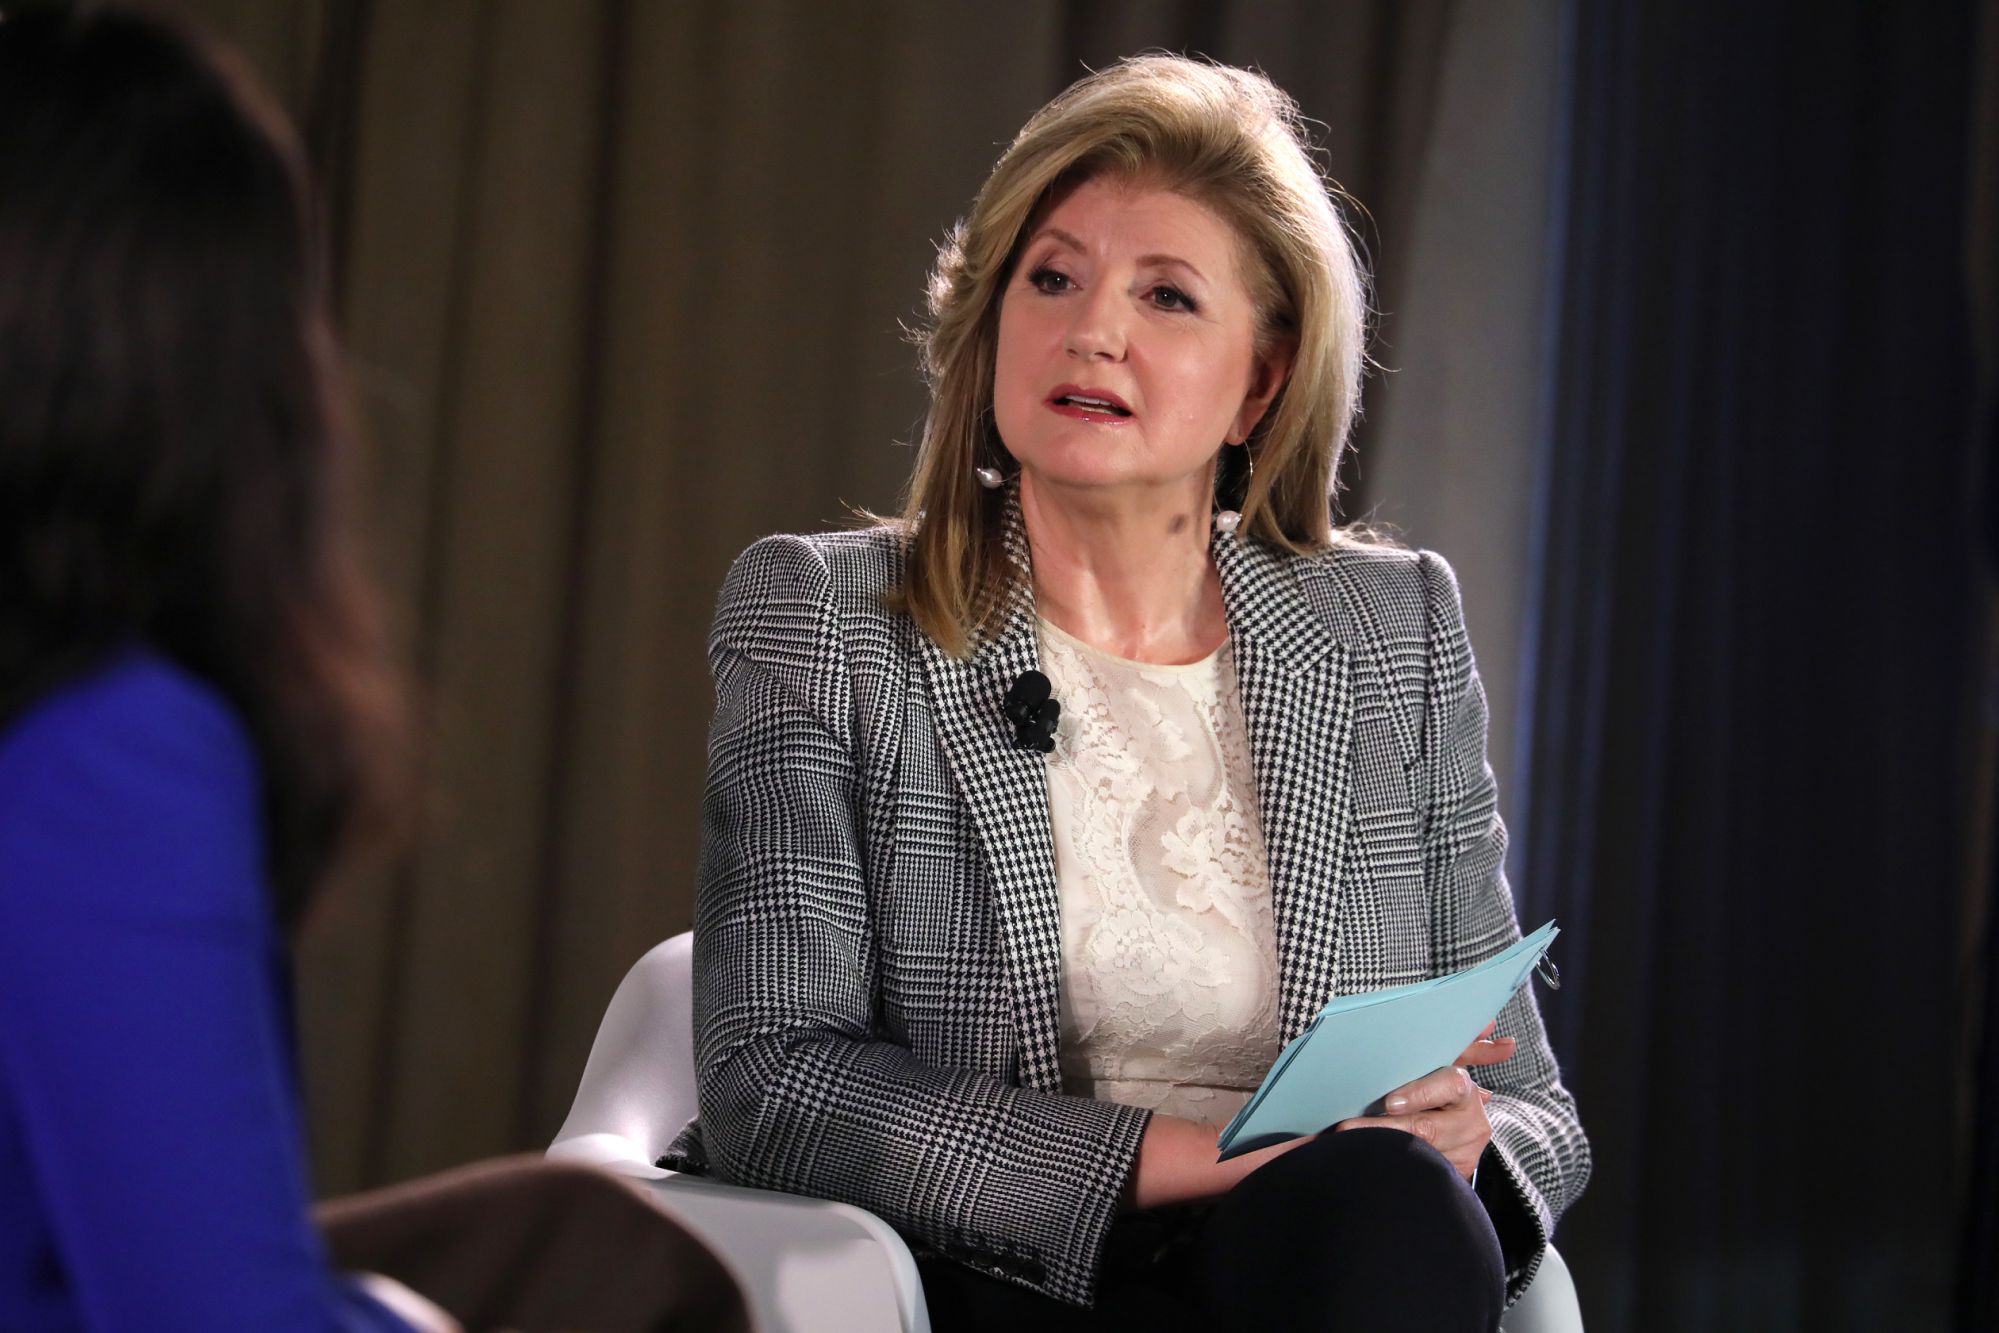 NEW YORK, NEW YORK - OCTOBER 17: Arianna Huffington speaks onstage during the TIME 100 Health Summit at Pier 17 on October 17, 2019 in New York City. (Photo by Brian Ach/Getty Images for TIME 100 Health Summit )